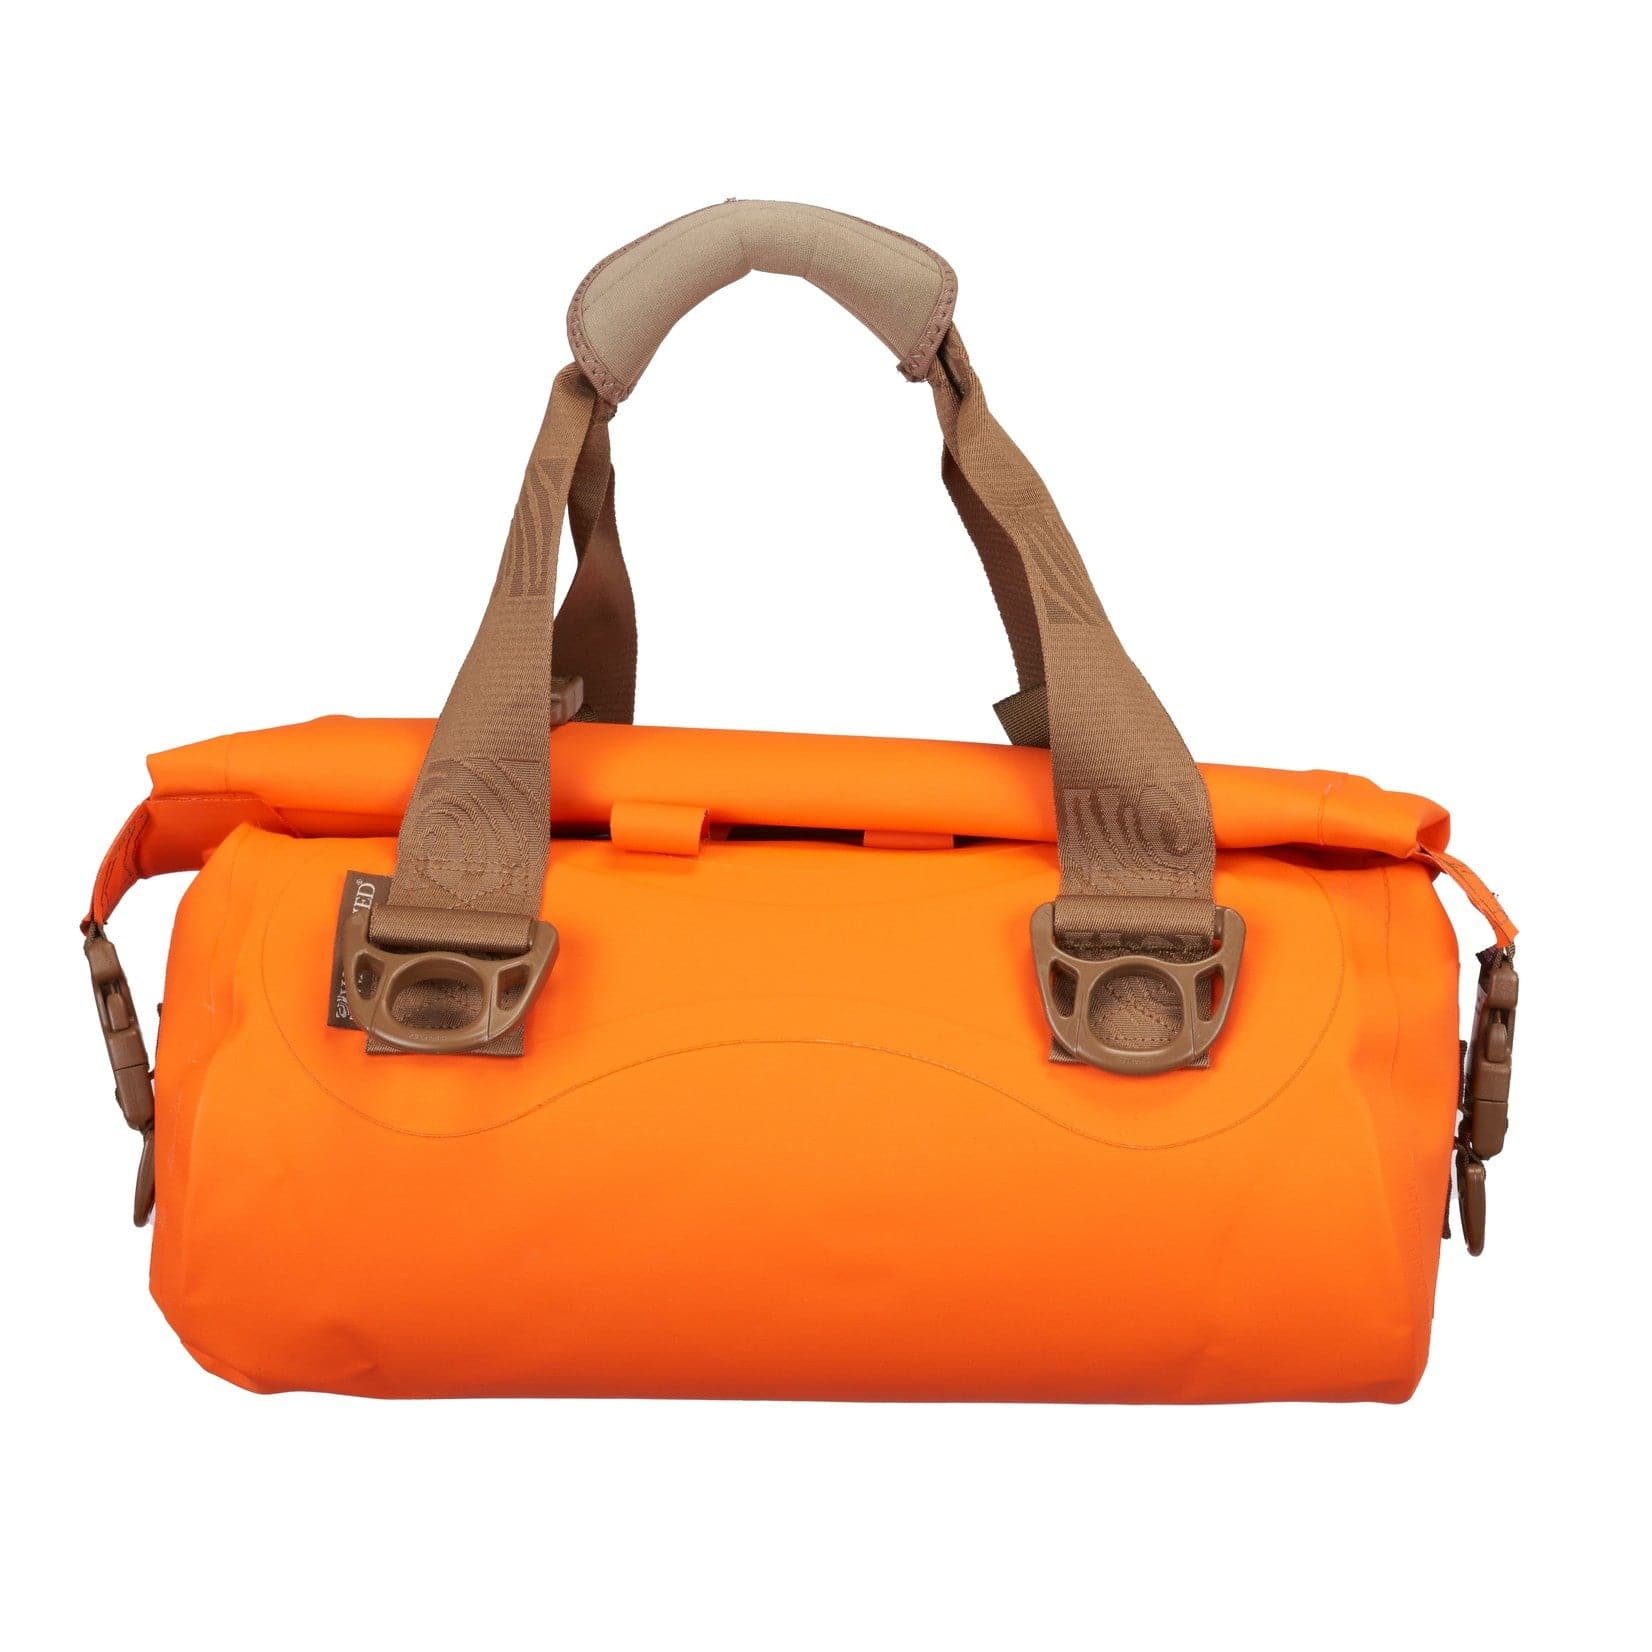 an orange duffel bag with two handles.